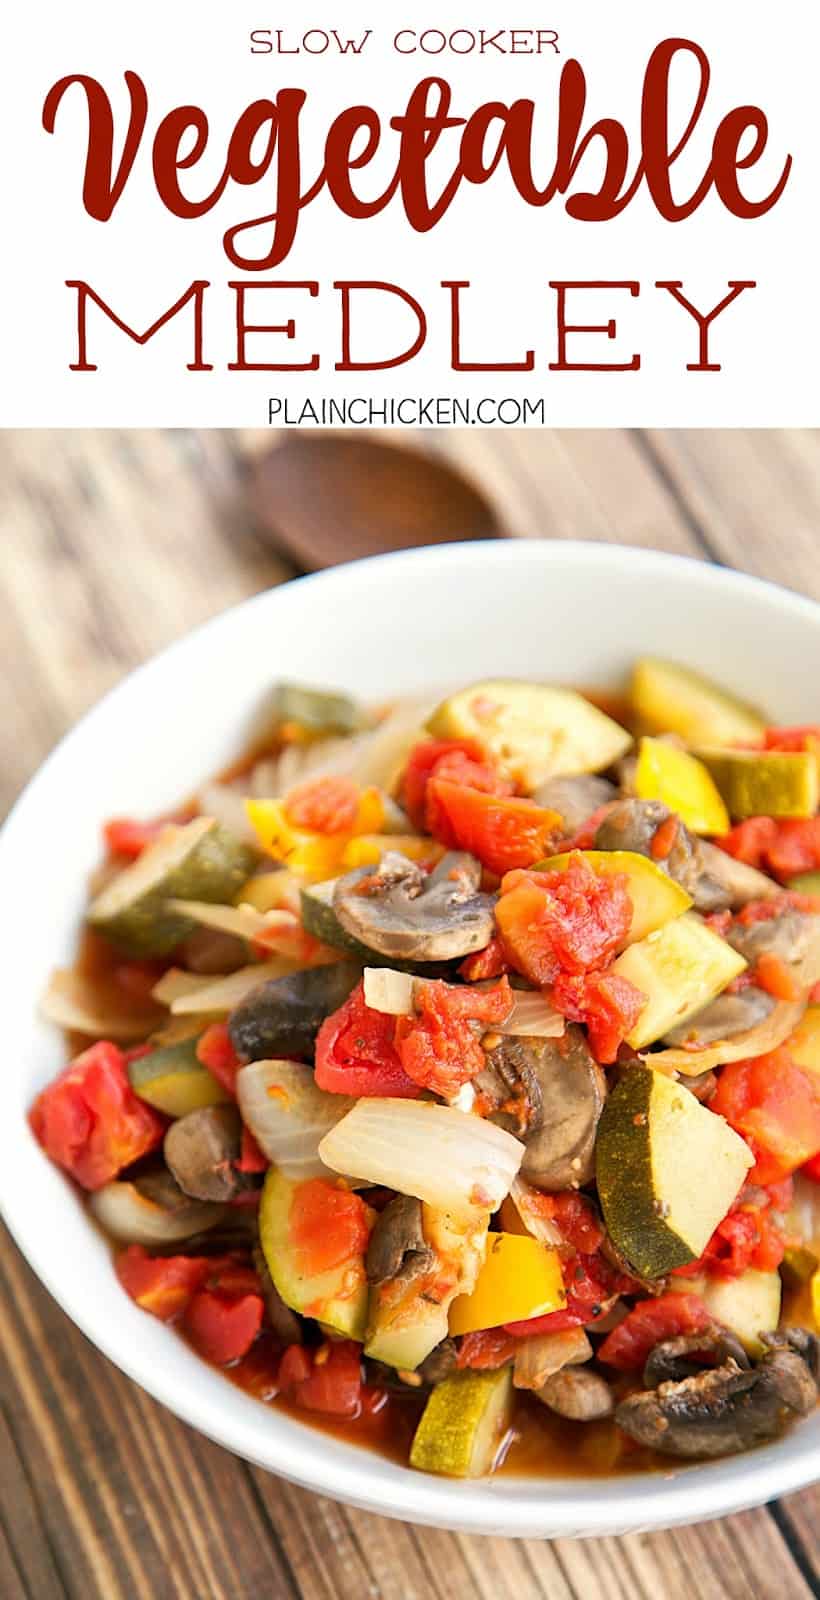 Slow Cooker Vegetable Medley - seriously delicious!! Onion, bell pepper, zucchini, tomatoes, mushrooms, garlic, oregano and pepper. Slow cook all day. Great as a side dish or over pasta!